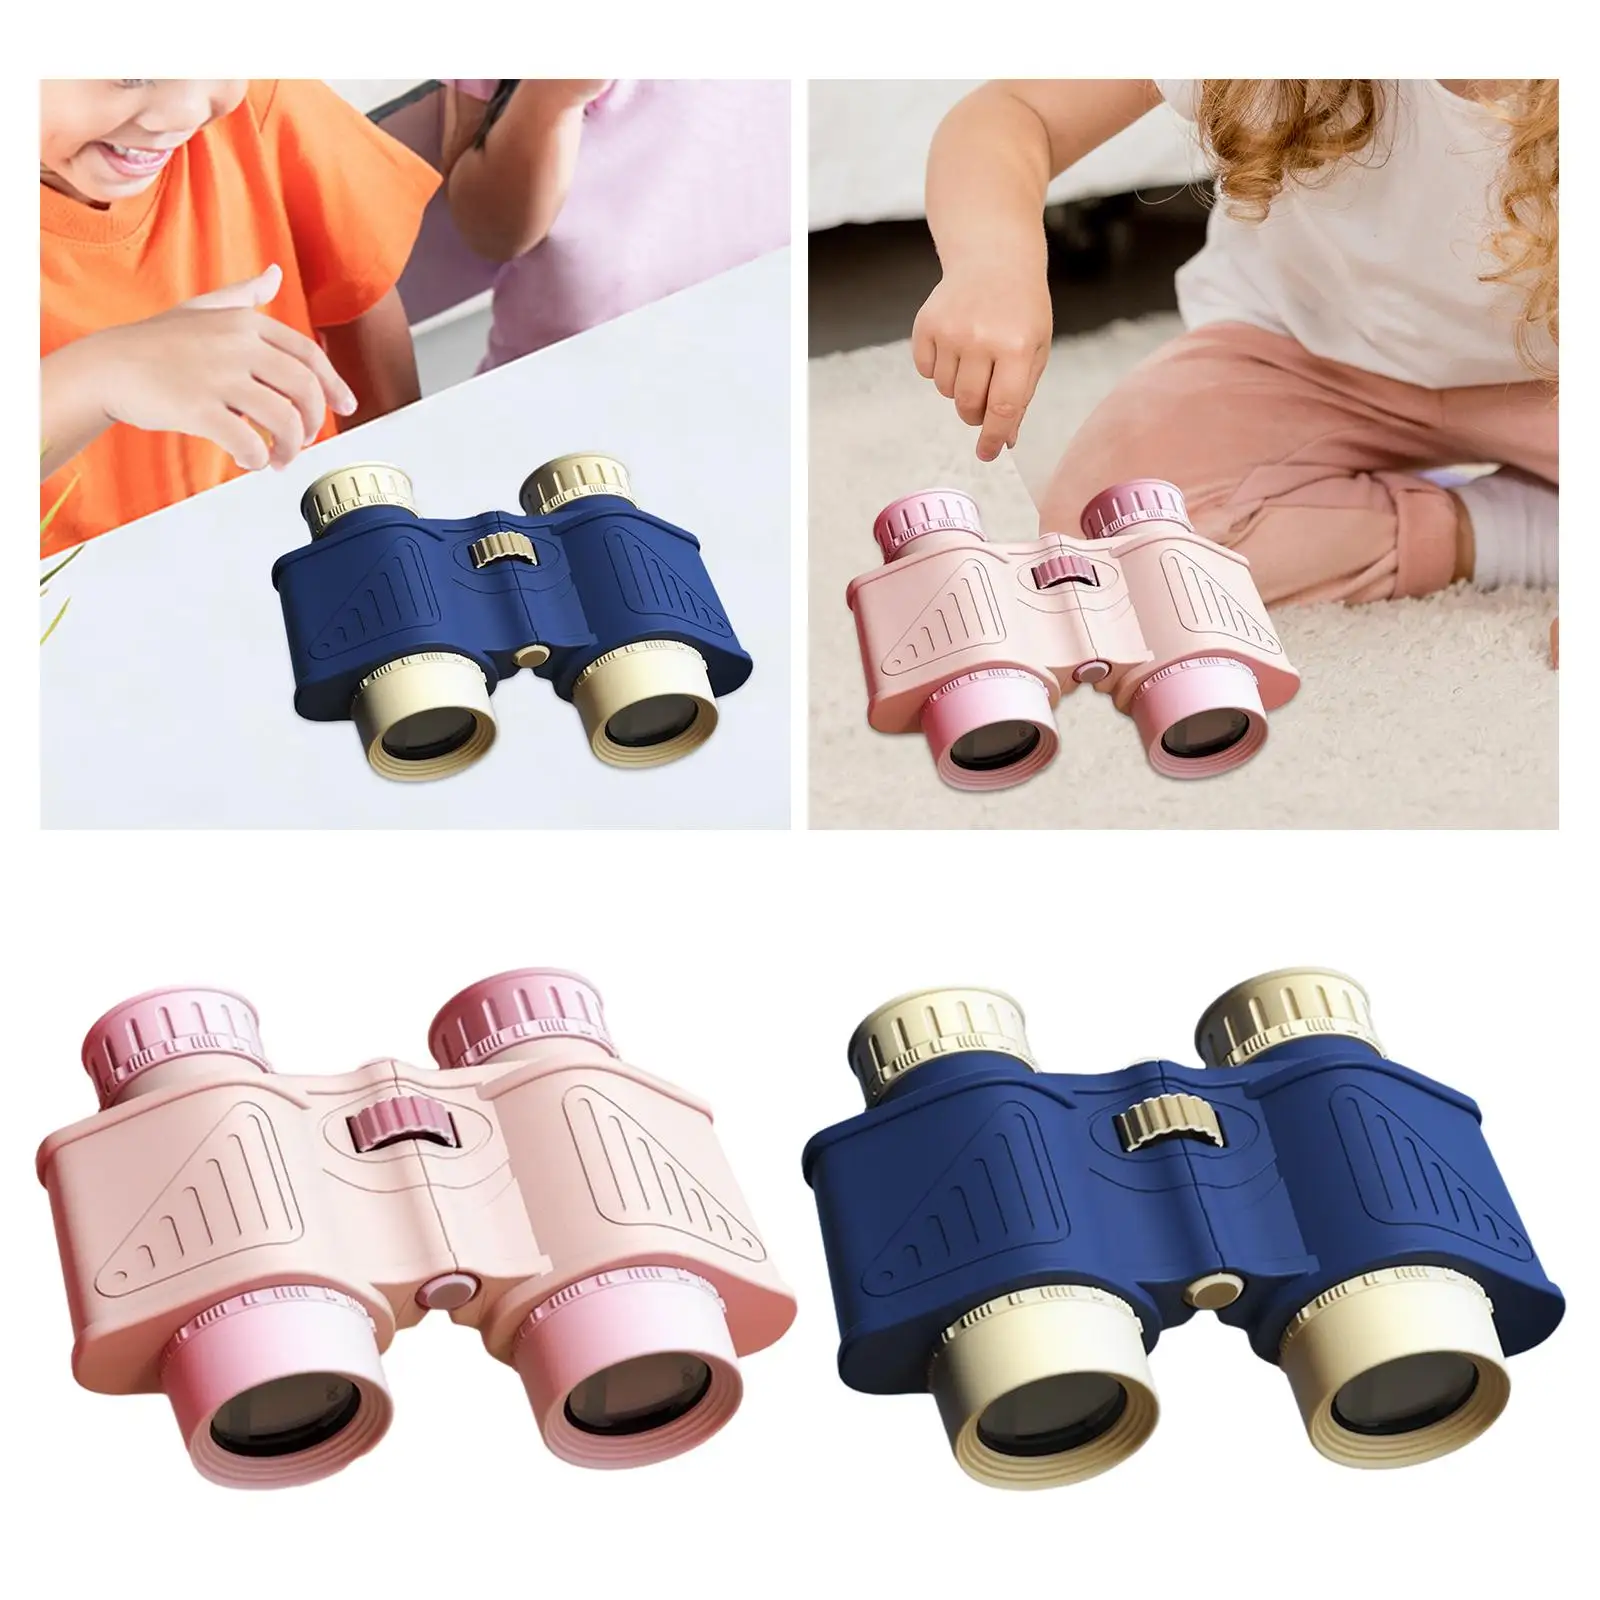 Kids Binoculars Toy Jungle Binoculars for Party Favors Sports Events